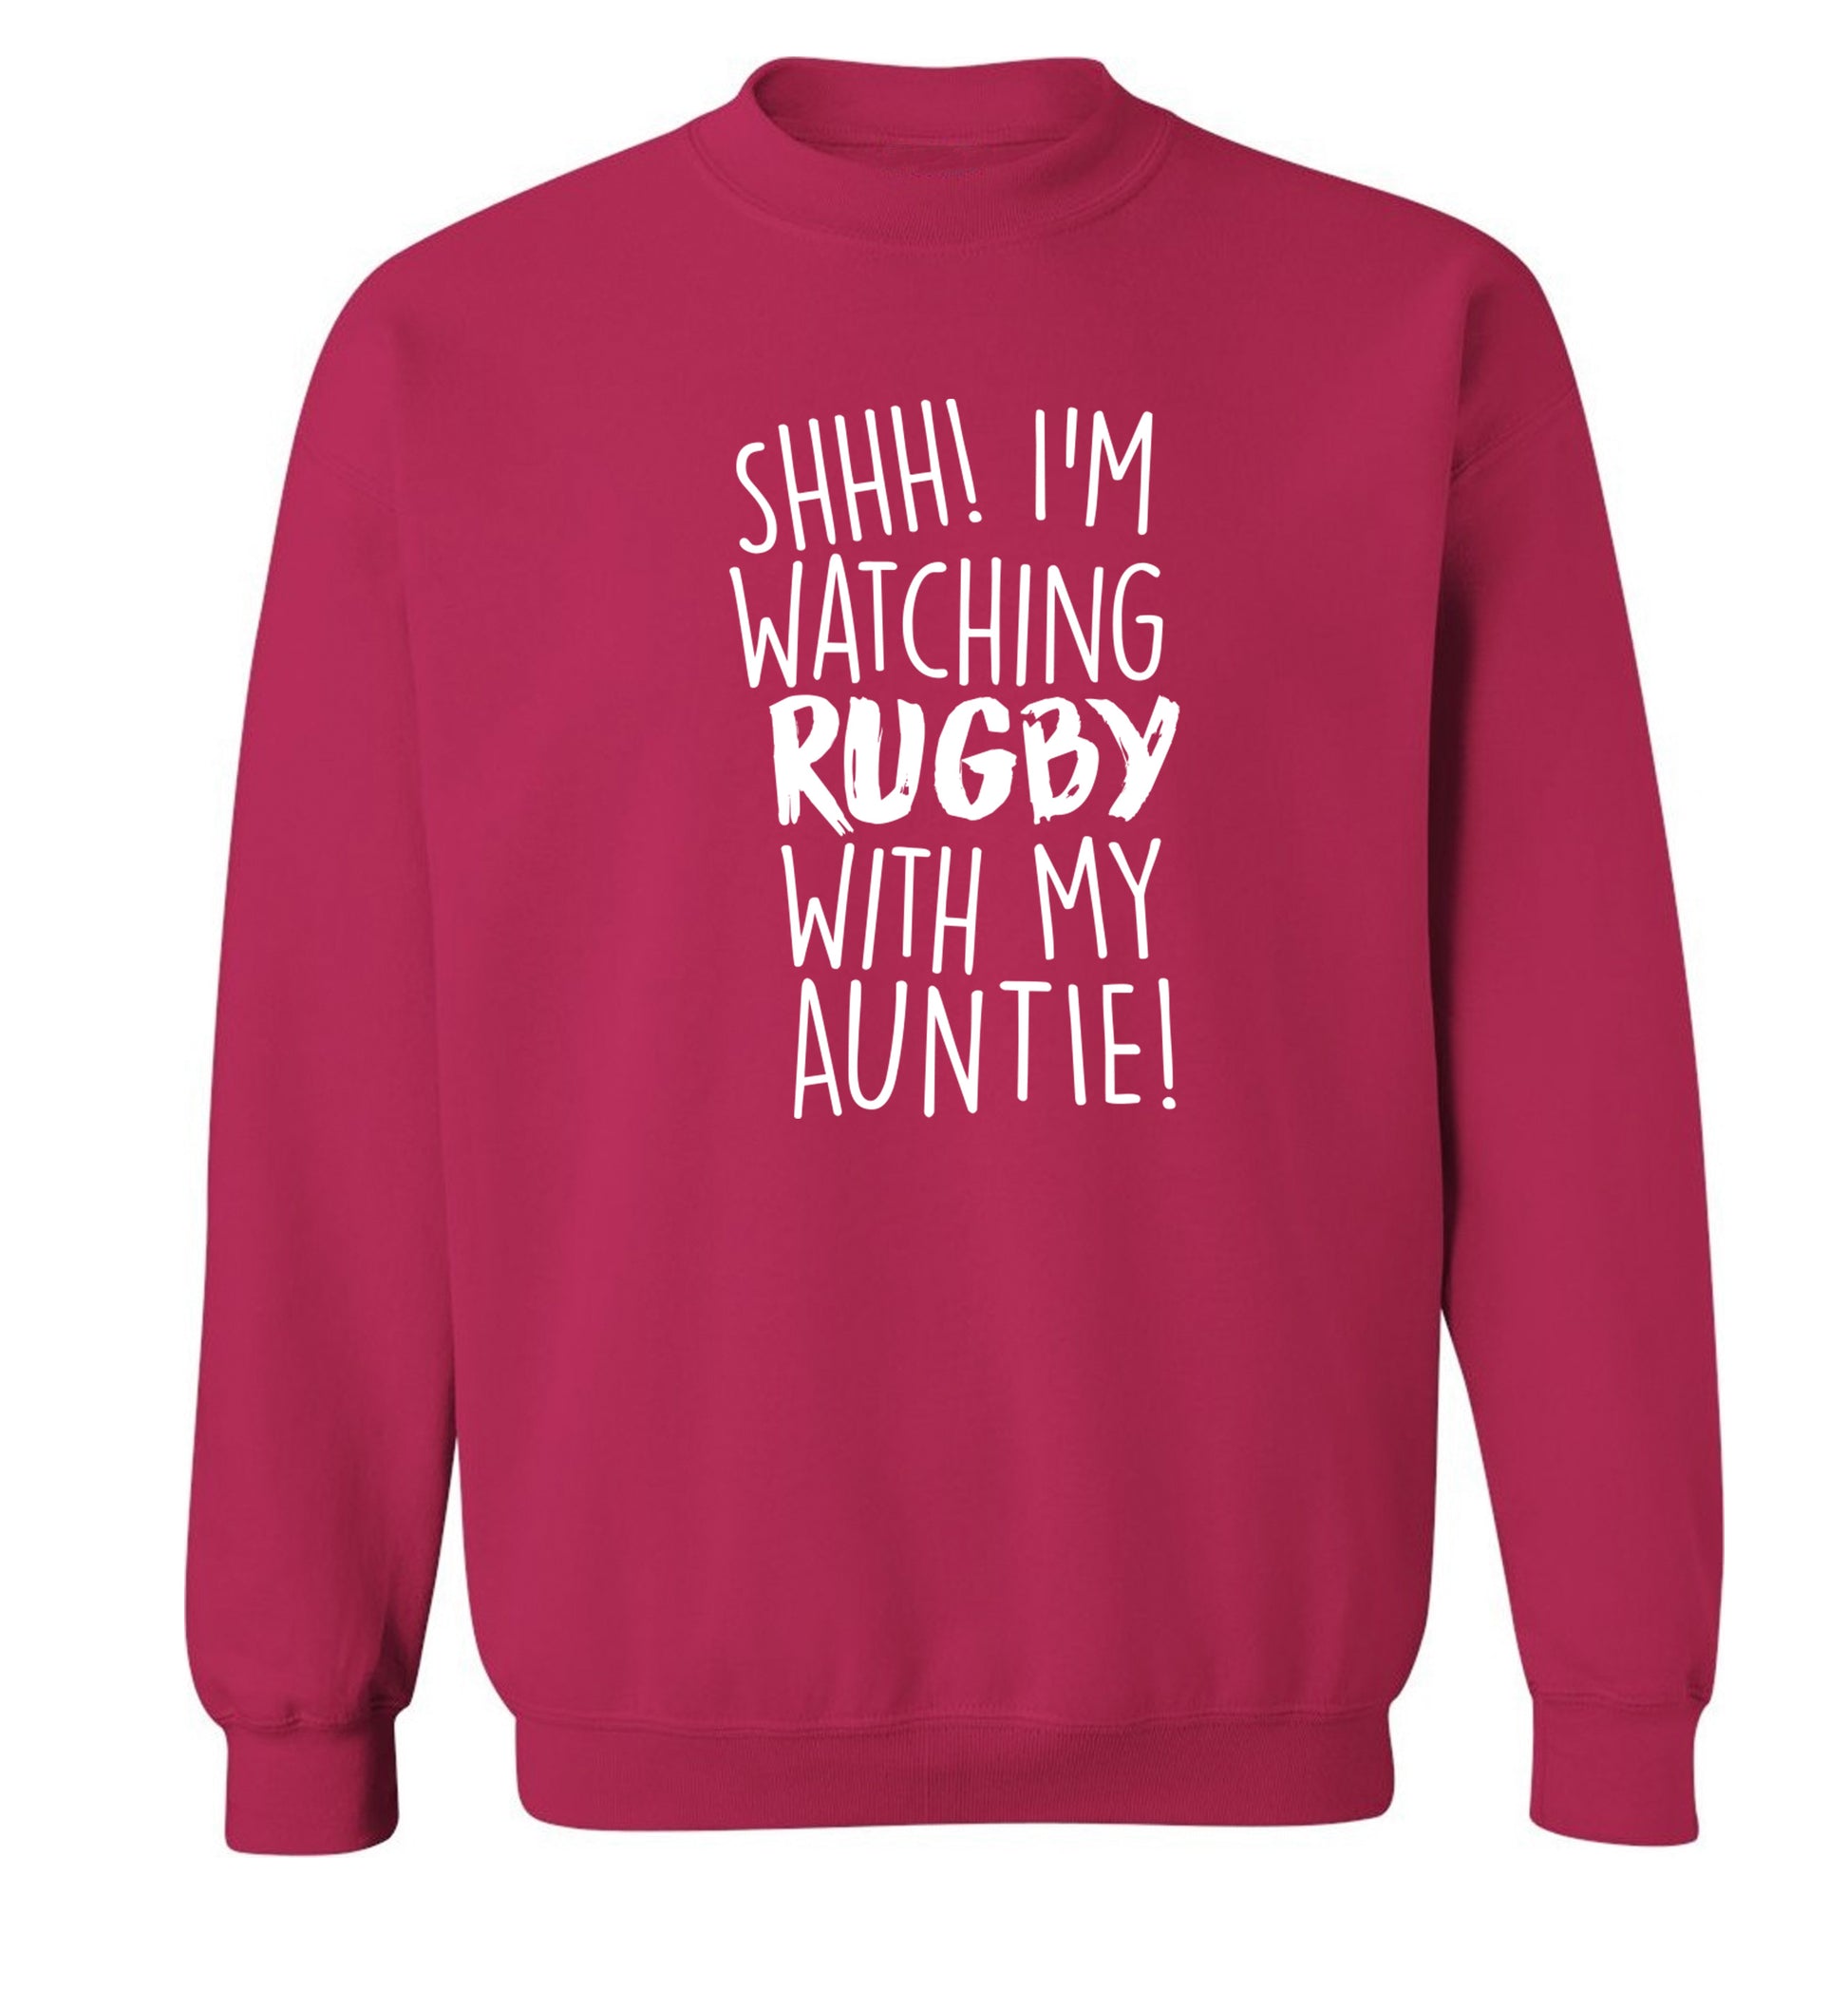 Shhh I'm watchin rugby with my auntie Adult's unisex pink Sweater 2XL